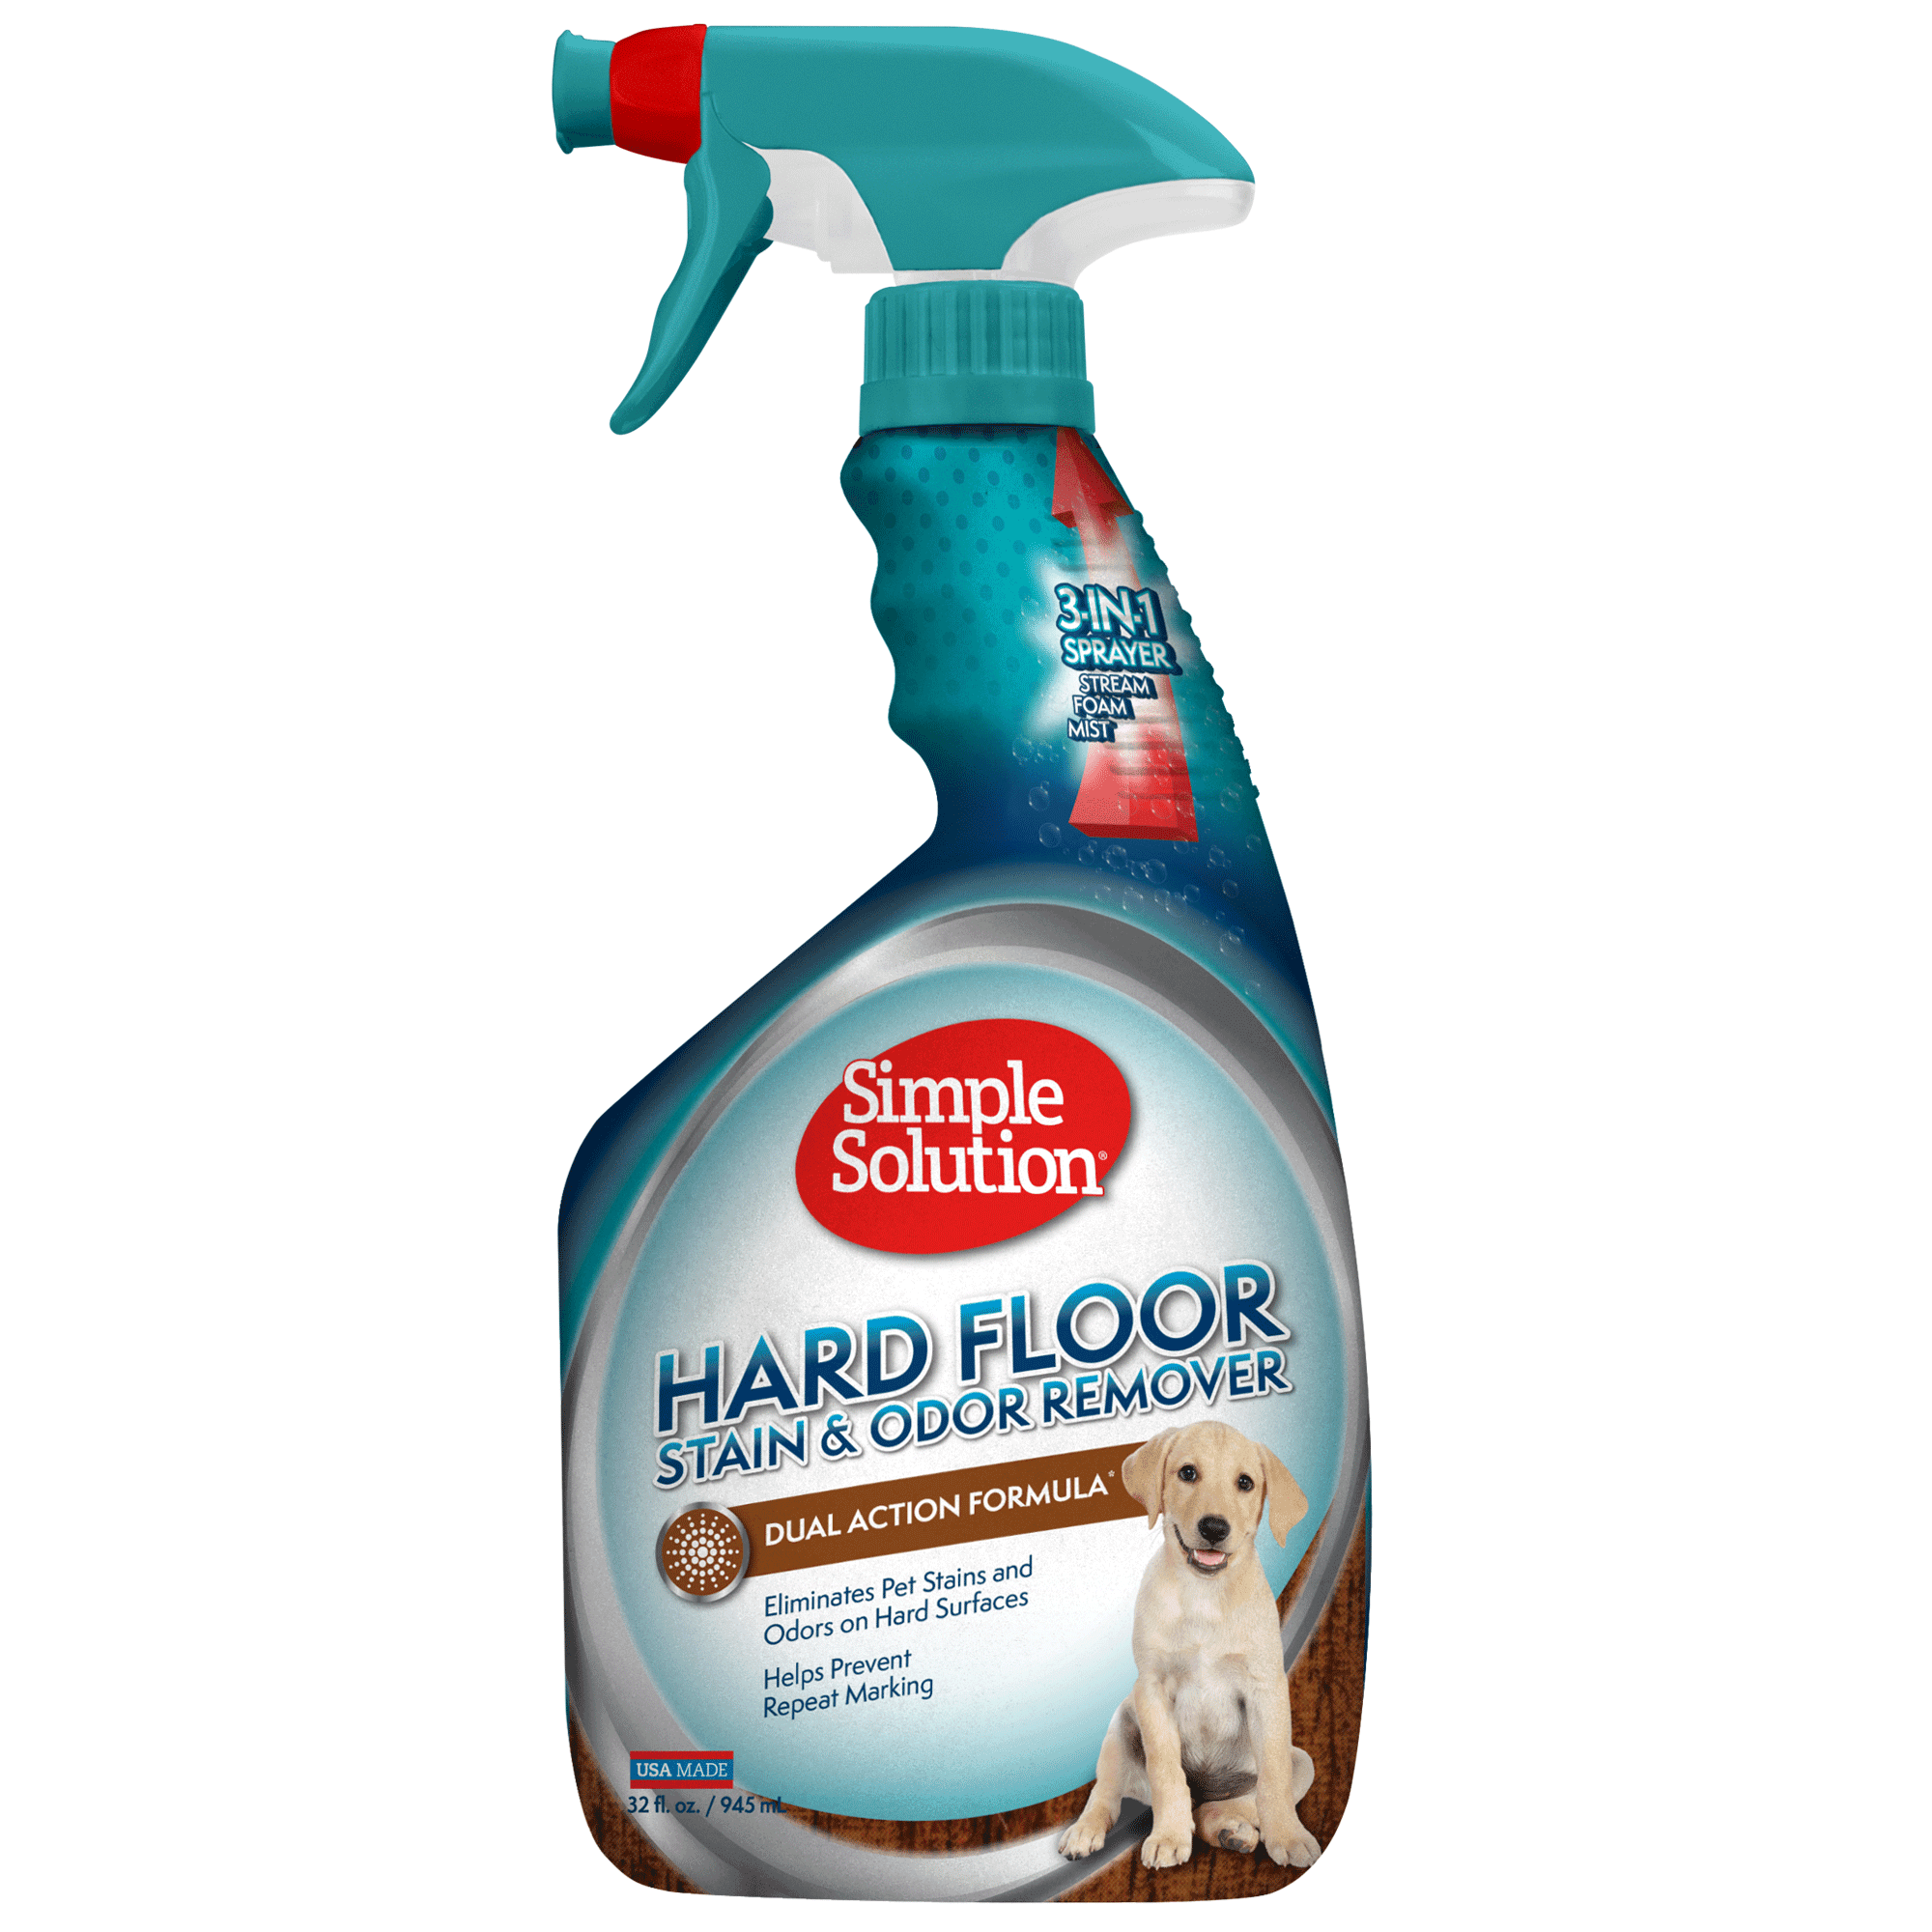 Hard Floor Pet Stain And Odor Remover, How To Remove Animal Urine Stains From Hardwood Floors